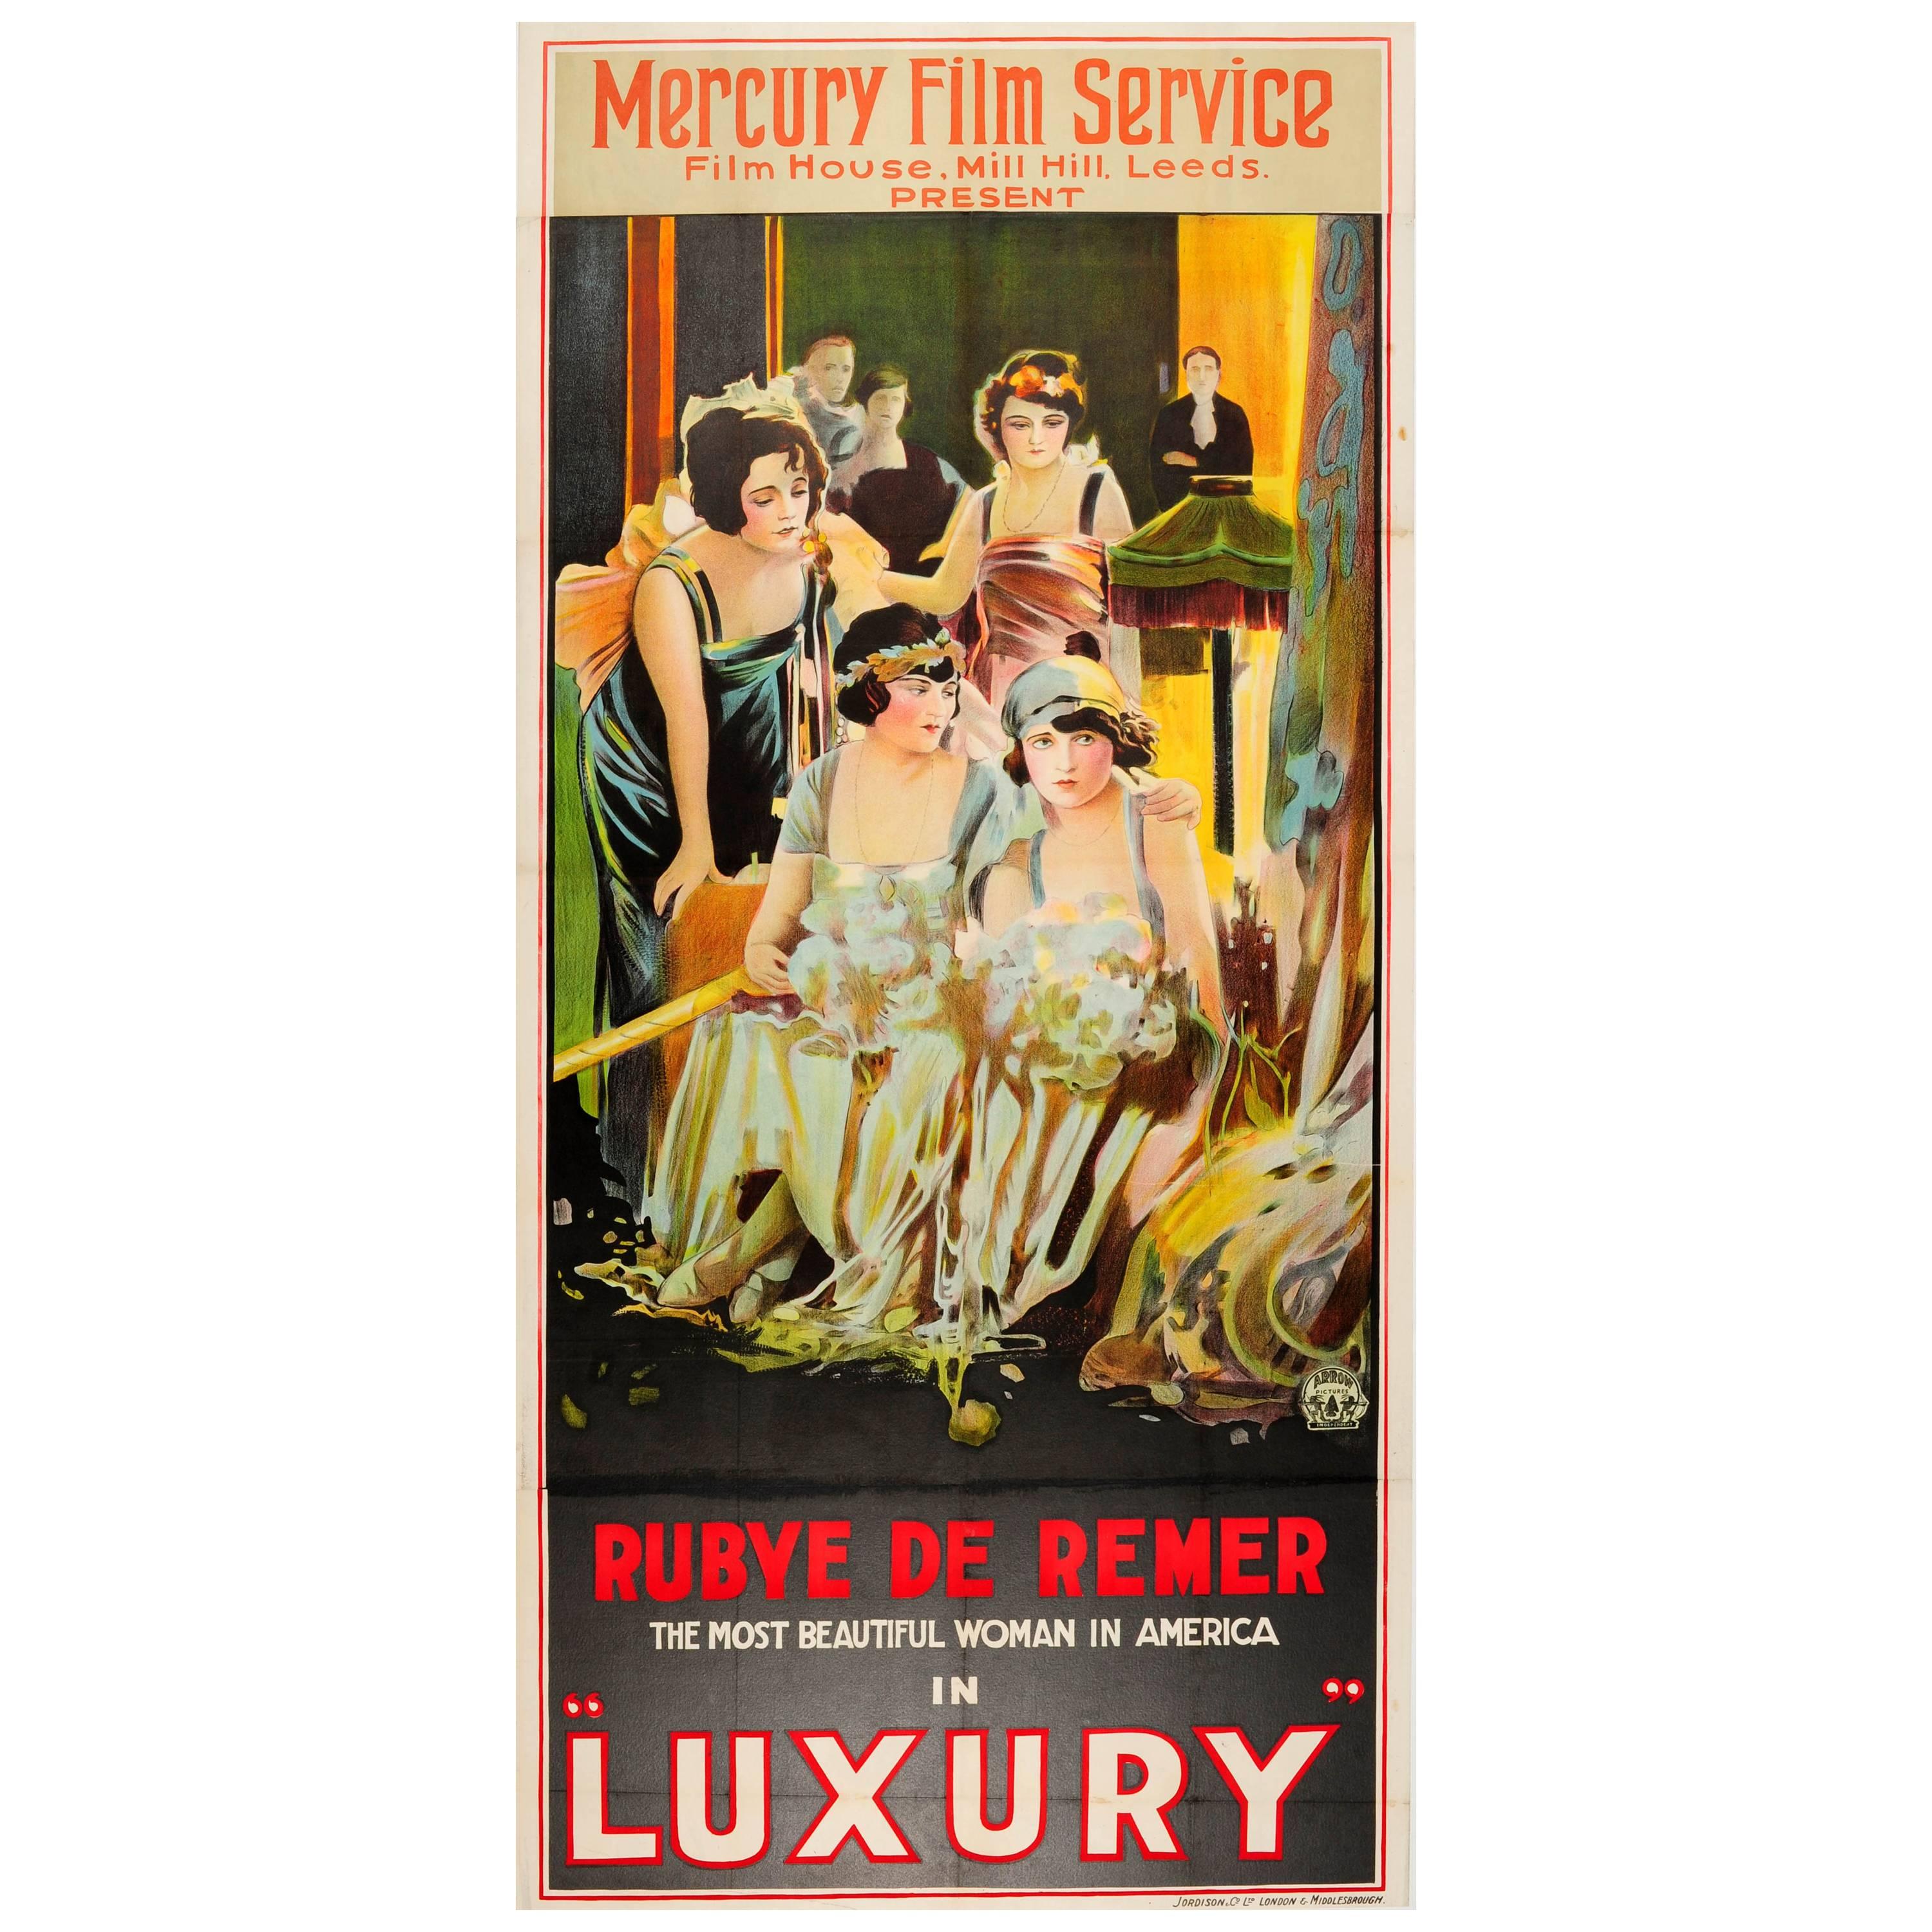 Large Original Vintage Movie Poster For The Film Luxury Starring Rubye De Remer